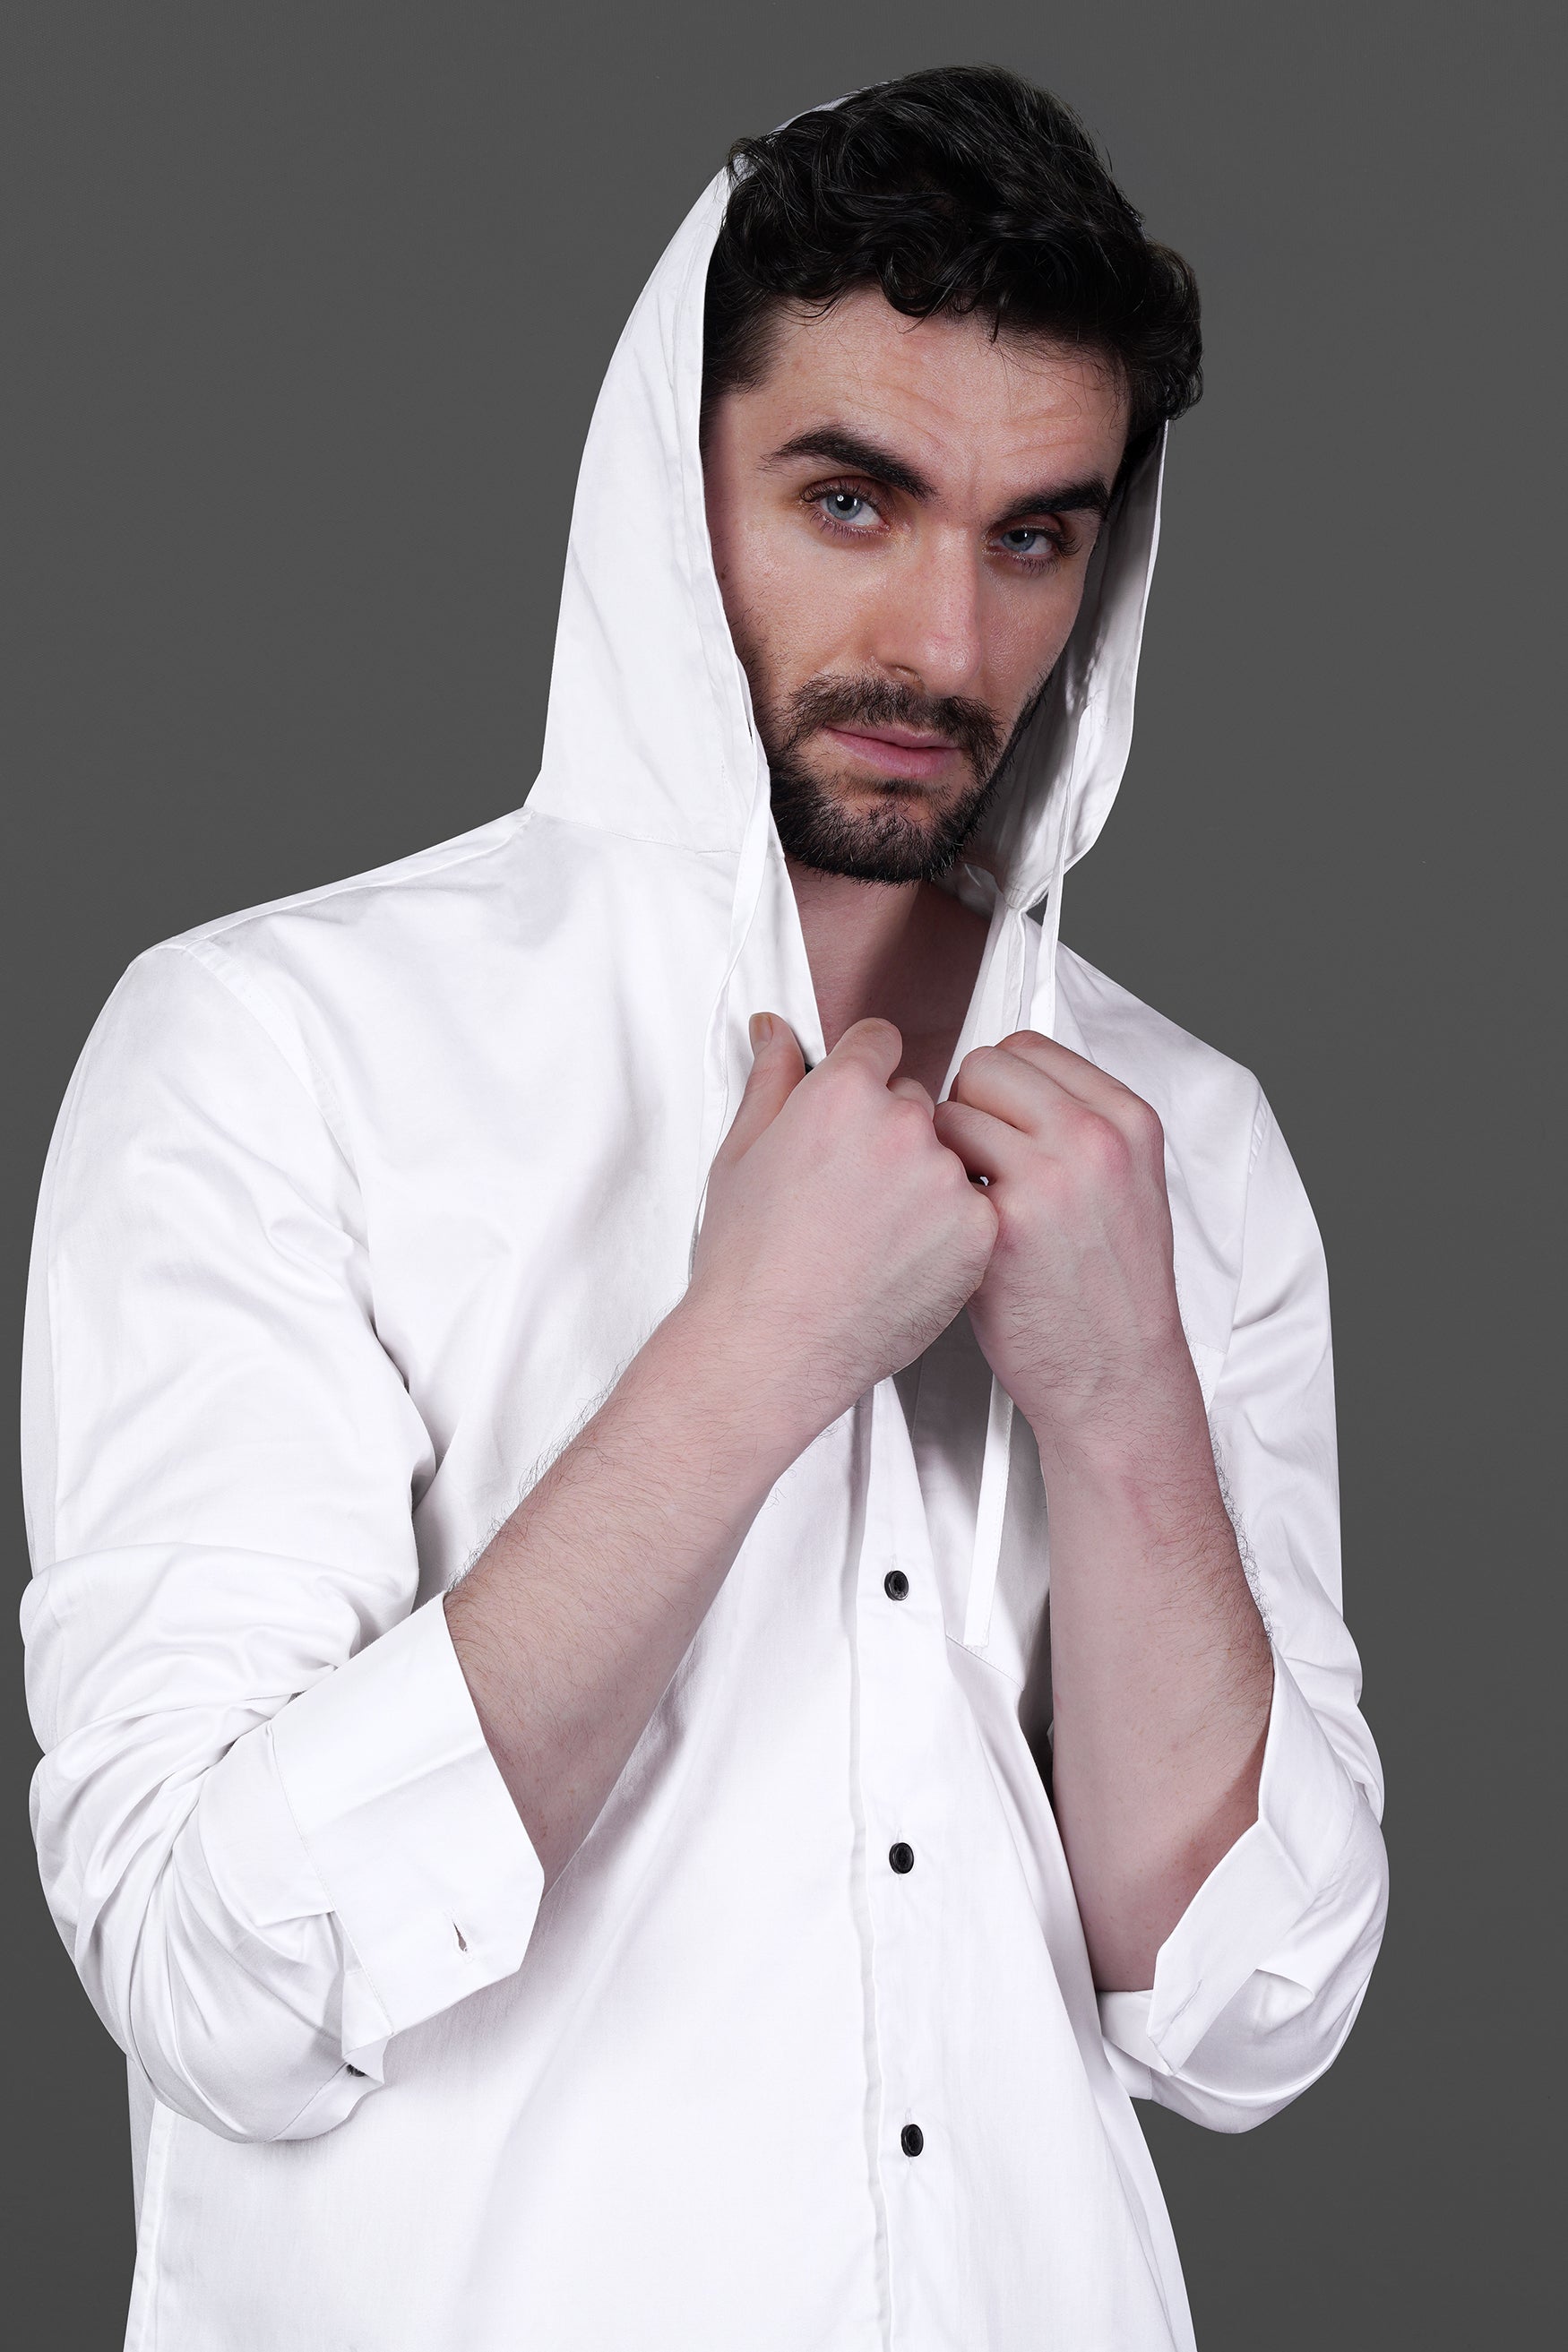 French Crown Bright White Casual Premium Hoodie Shirt For Men, 46 / XXL / Half / Short Sleeves